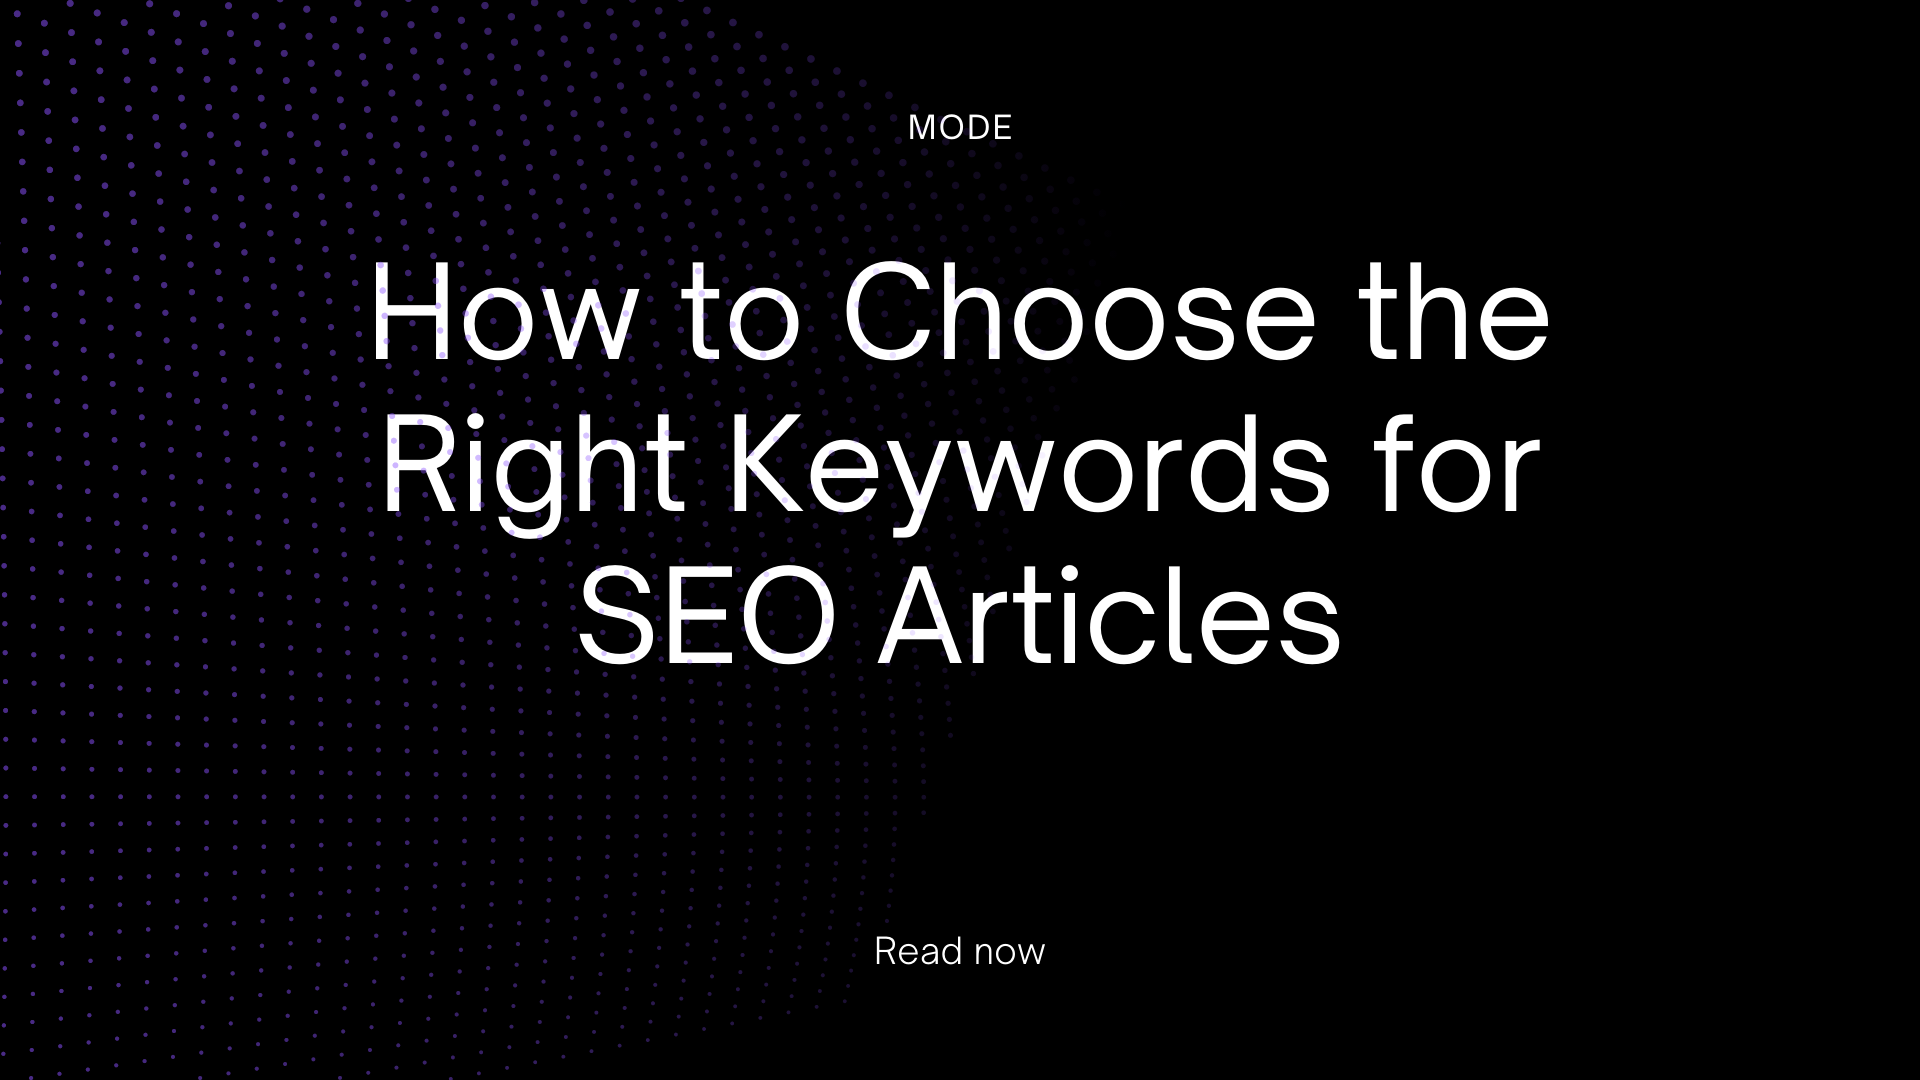 How to Choose the Right Keywords for SEO Articles